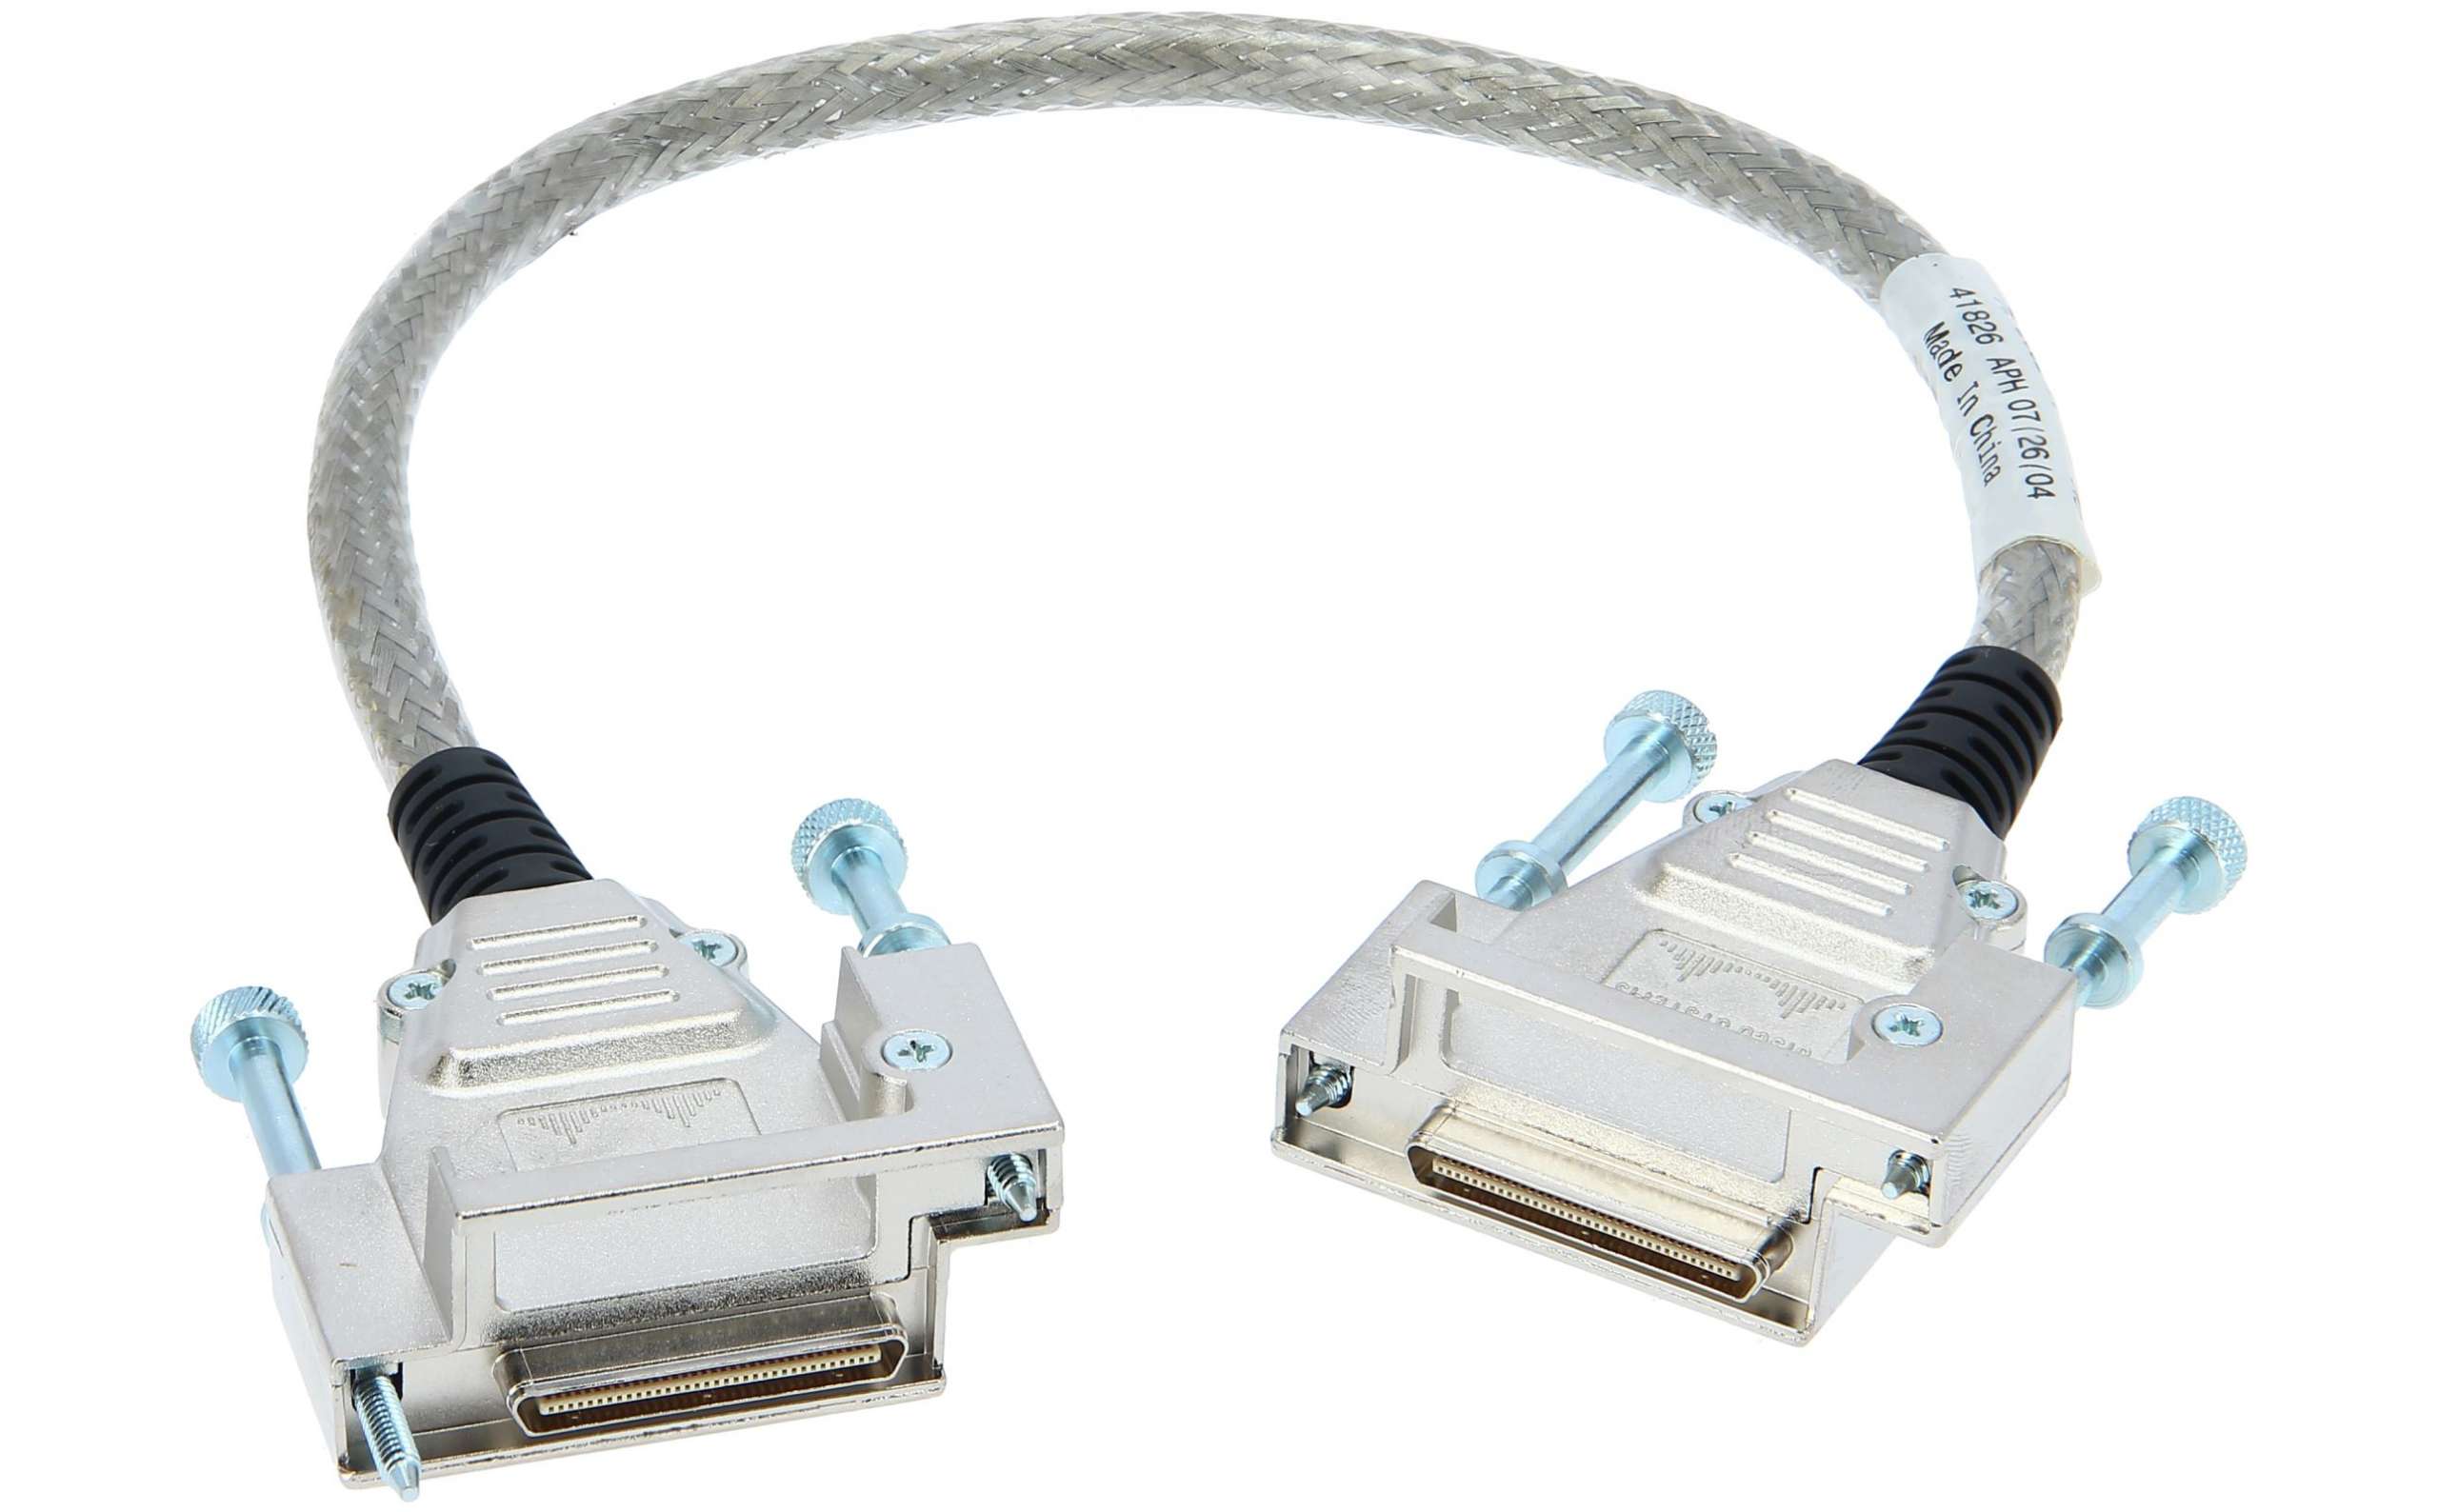 3560X-48 3750G-24 for sale online Cisco StackWise Stacking cable 50 cm for Catalyst 3560X-24 